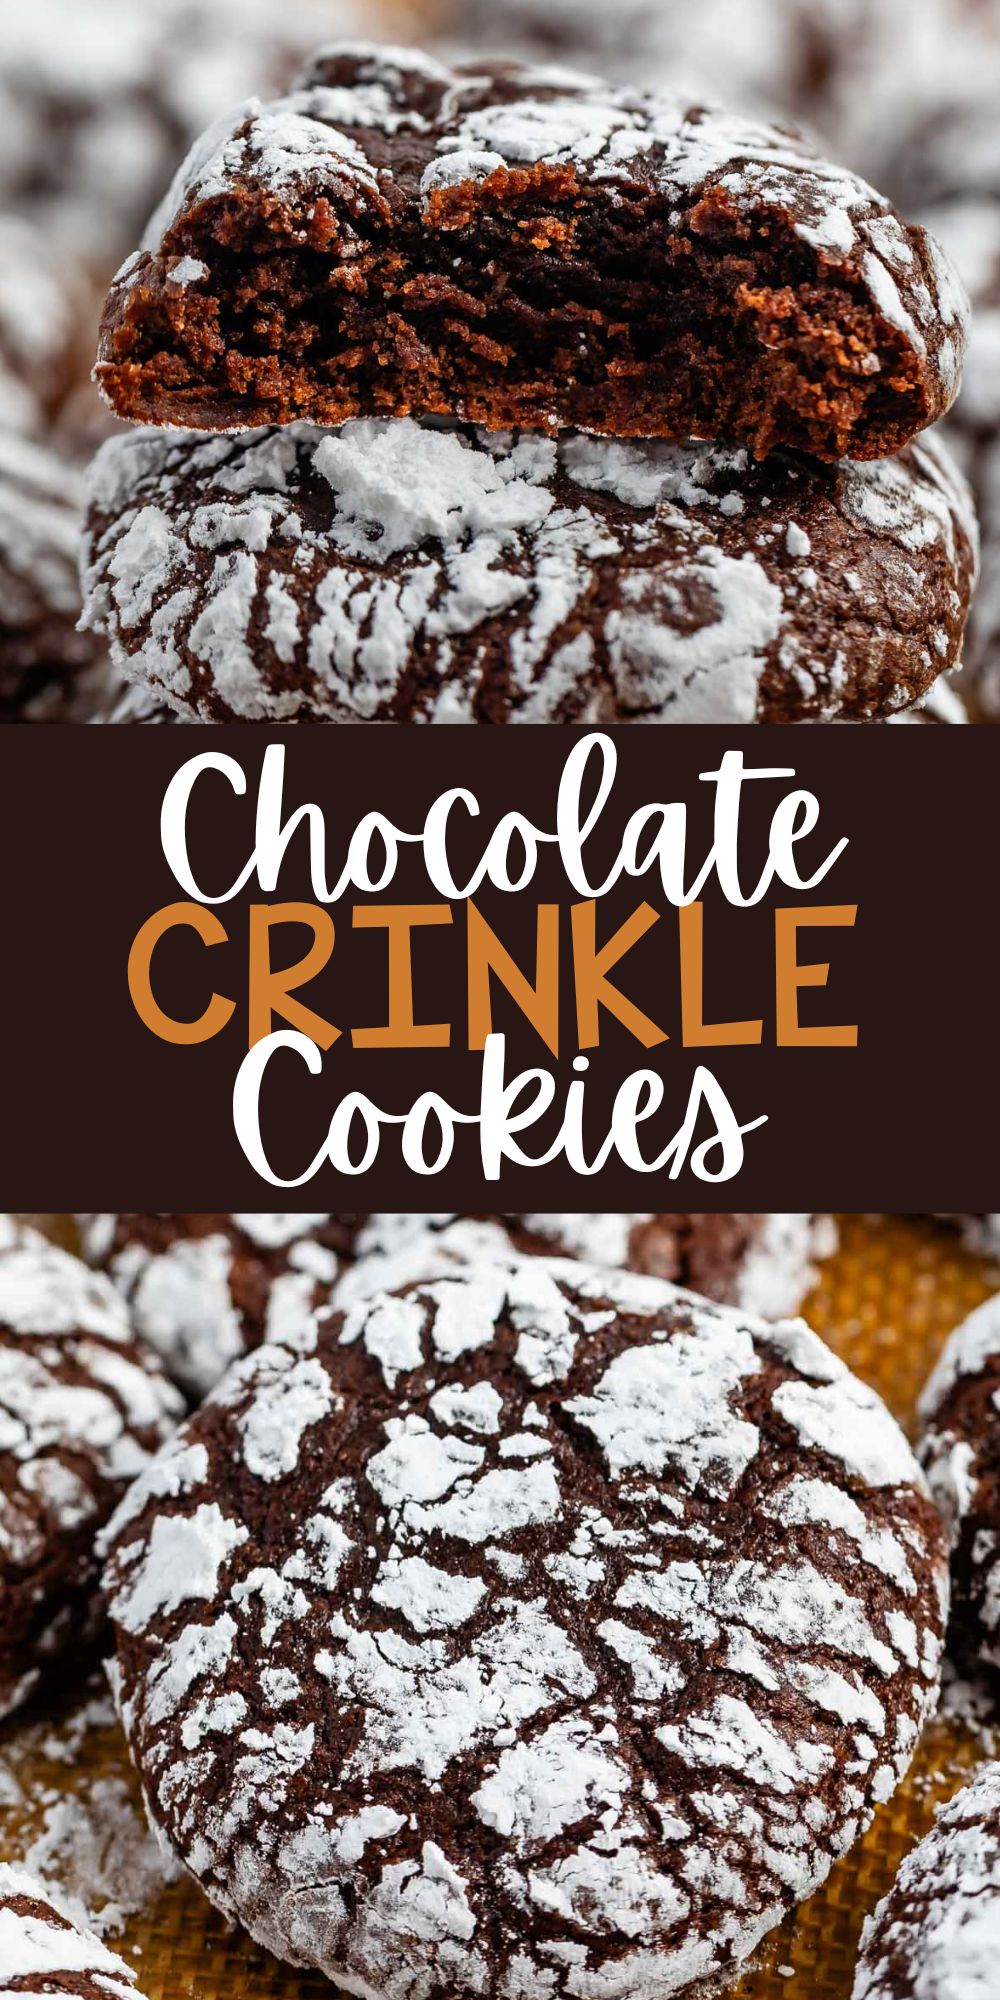 two photos chocolate crinkle cookies covered in powdered sugar with words on the image.